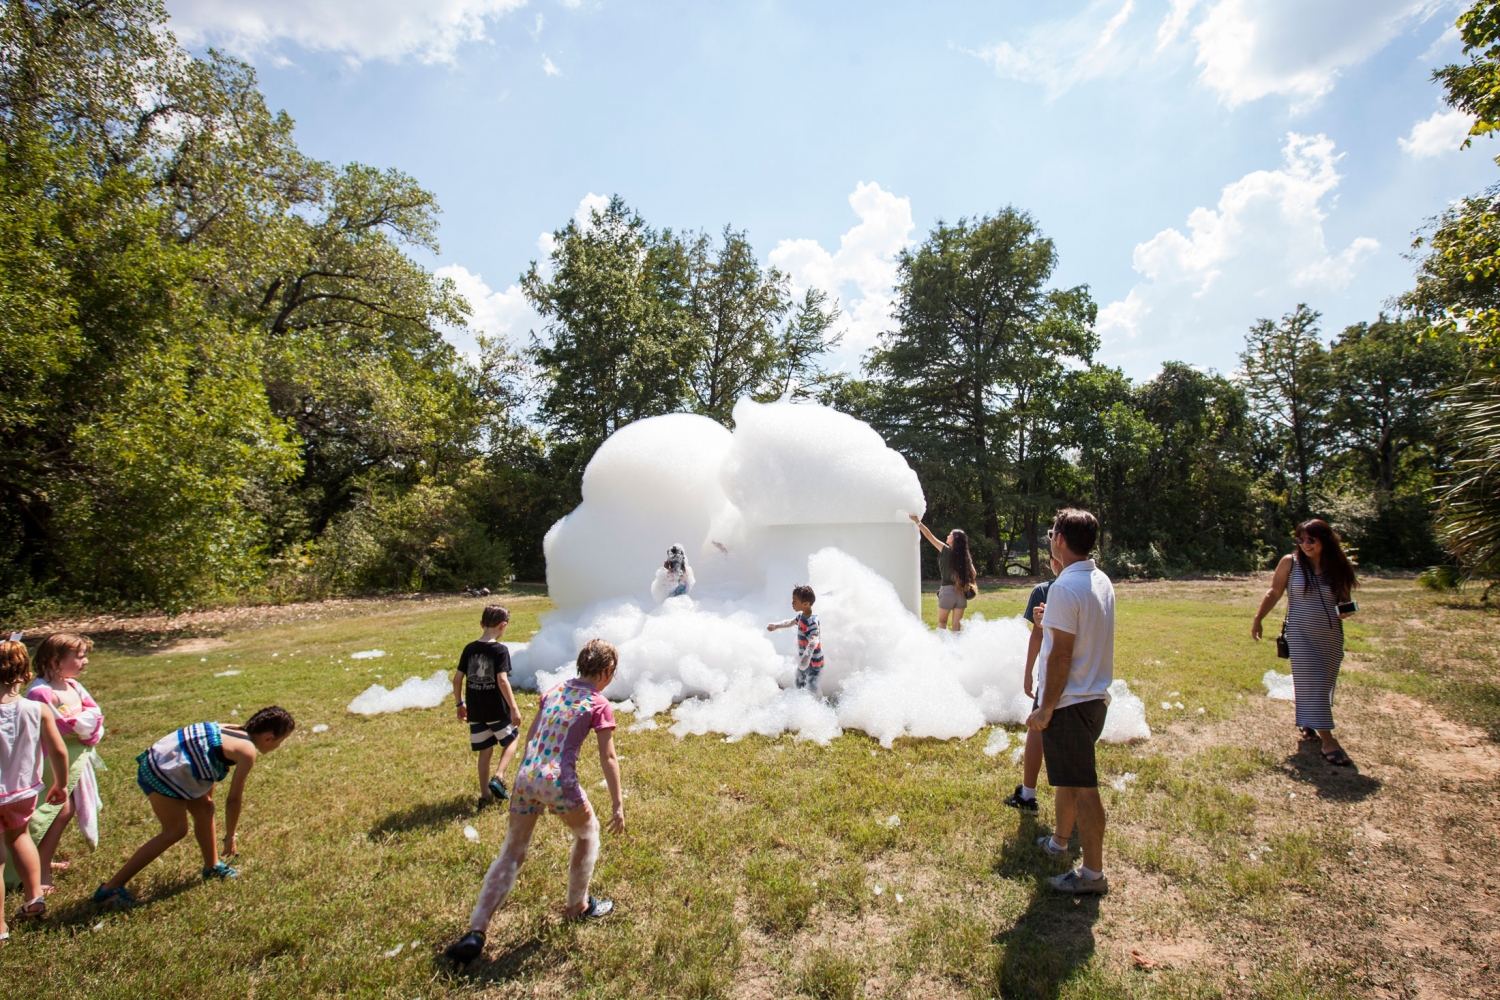 Roger Hiorns
A retrospective view of the pathway, 2008 &amp;ndash; ongoing
Foam, compressor, and polyester tanks
Dimensions variable
Installation view,&amp;nbsp;Strange Pilgrims, The Contemporary Austin &amp;ndash; Betty and Edward Sculpture Park at Laguna Gloria, 2015
Image &amp;copy; The Contemporary Austin. Courtesy The Contemporary Austin. Photo: Brian Fitzsimmons